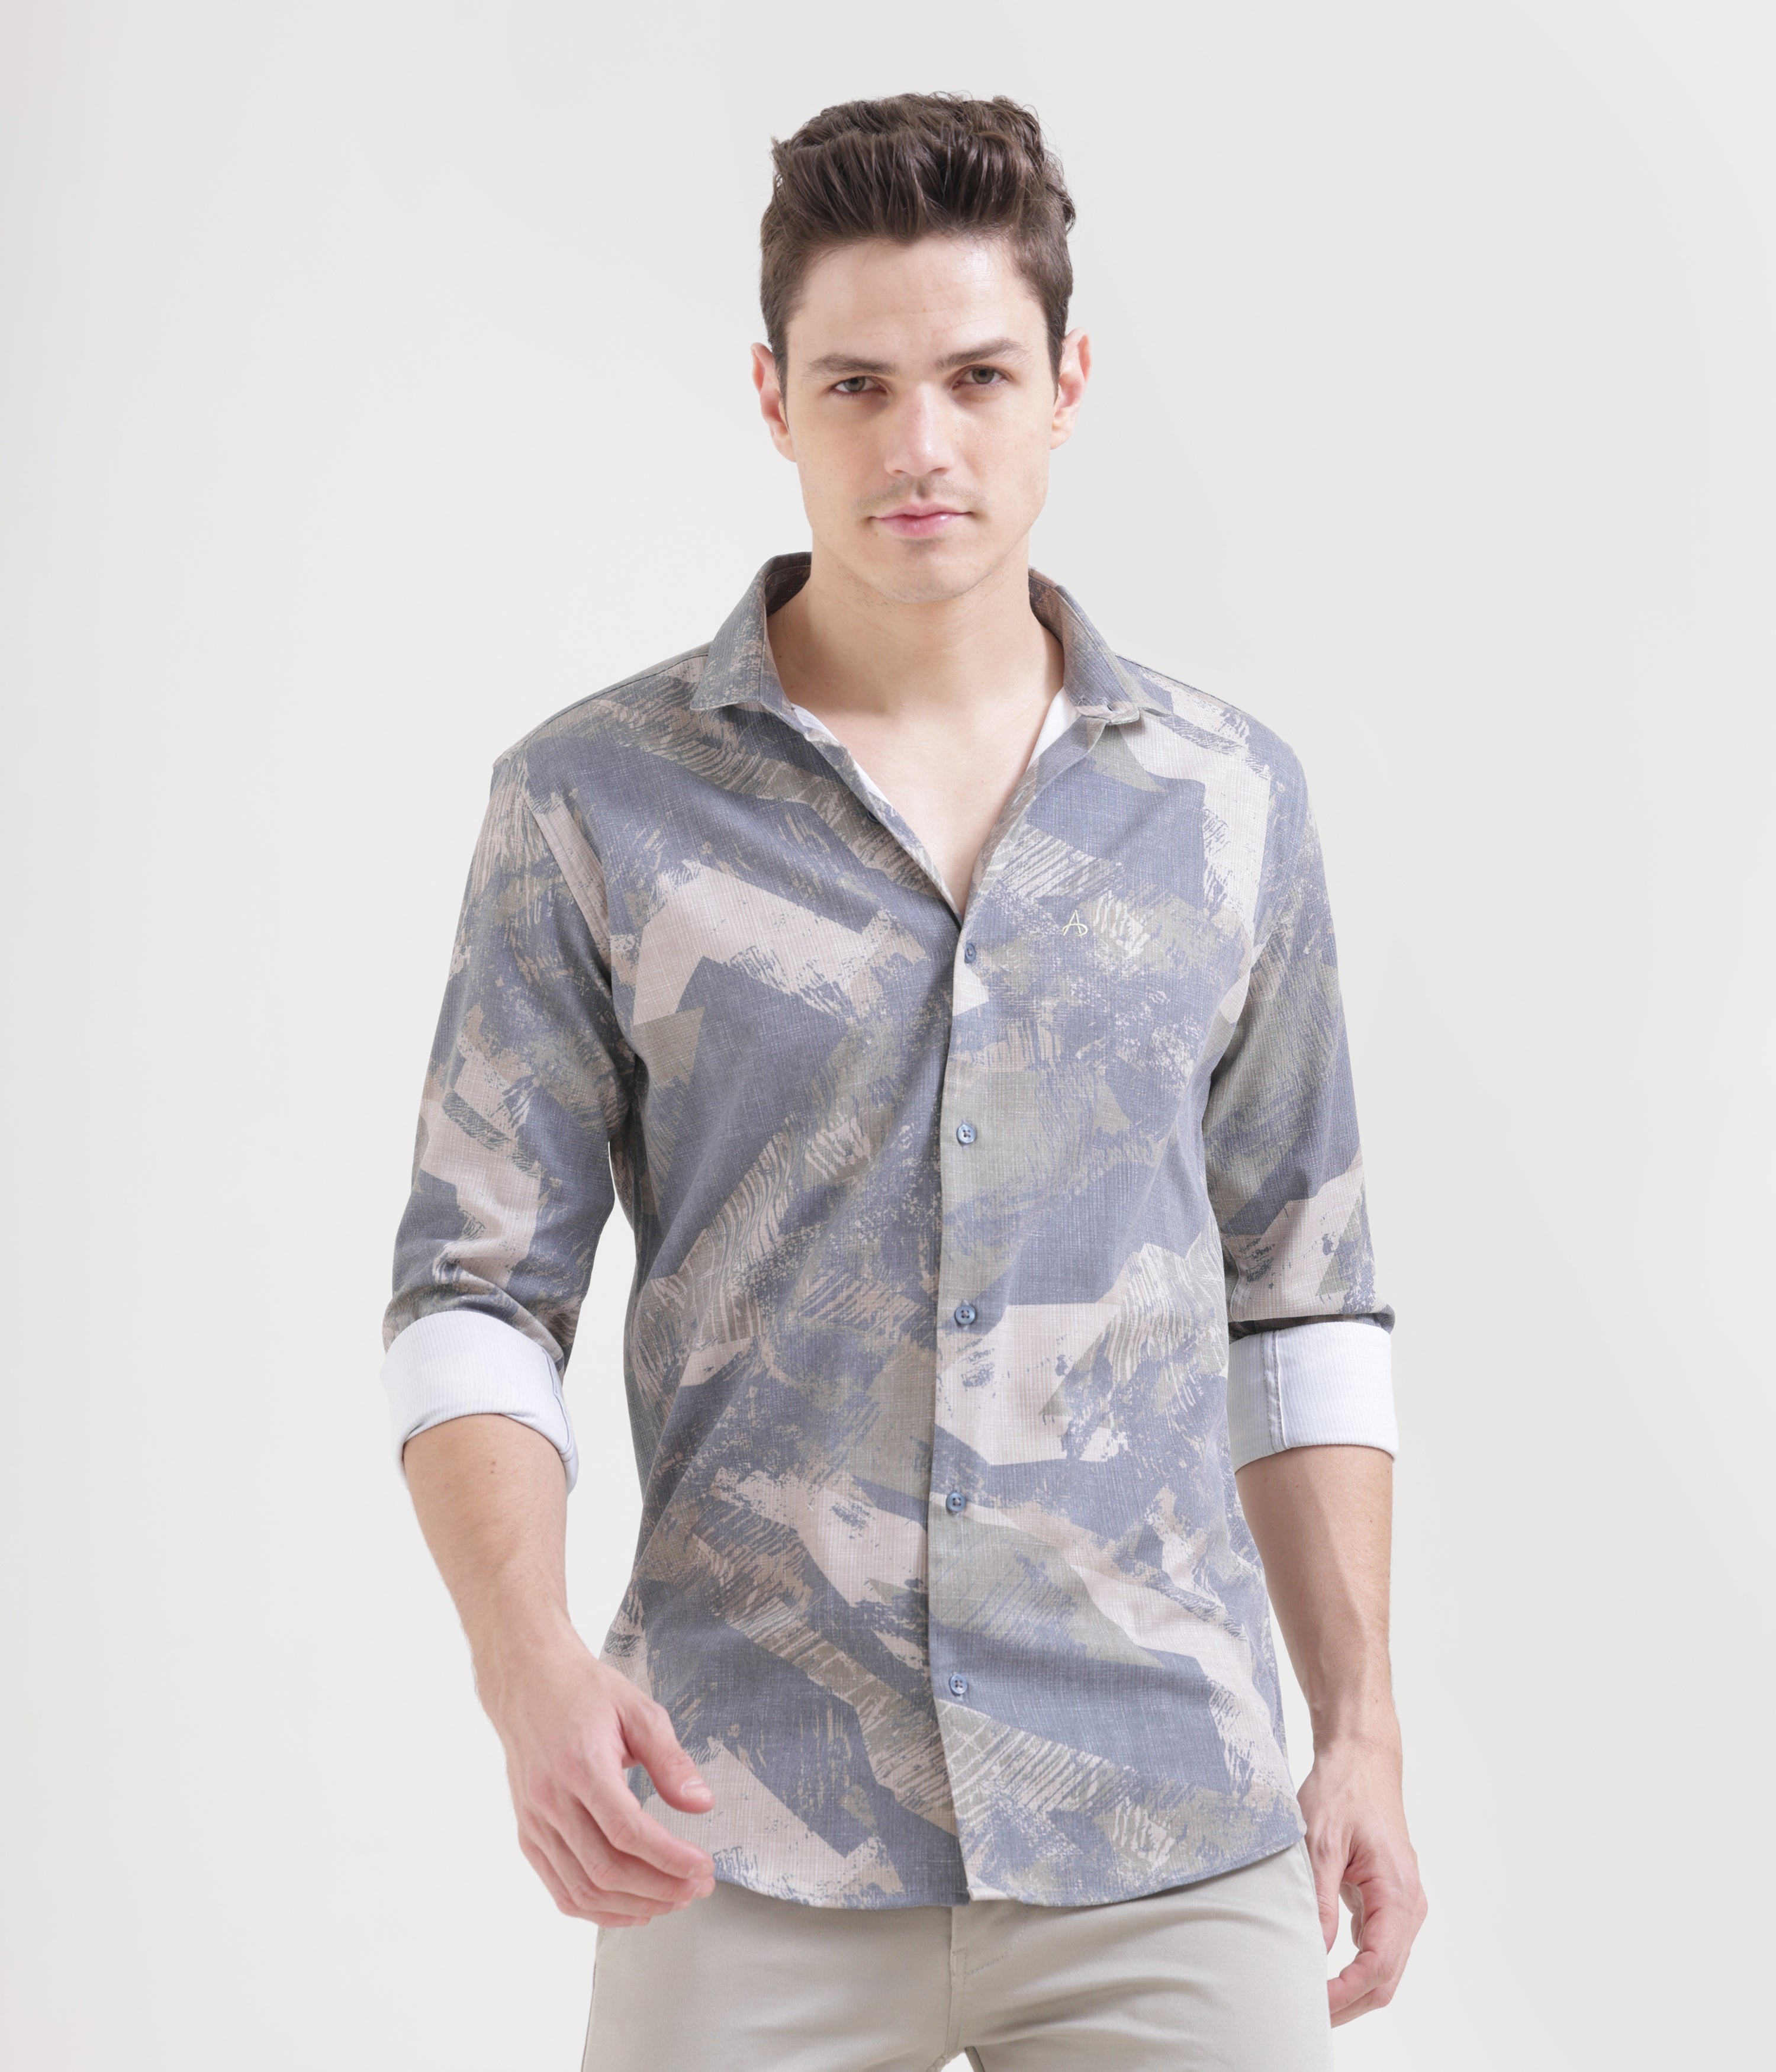 Beige Printed Slim Fit Shirt: Versatile Classic for Every Occasion